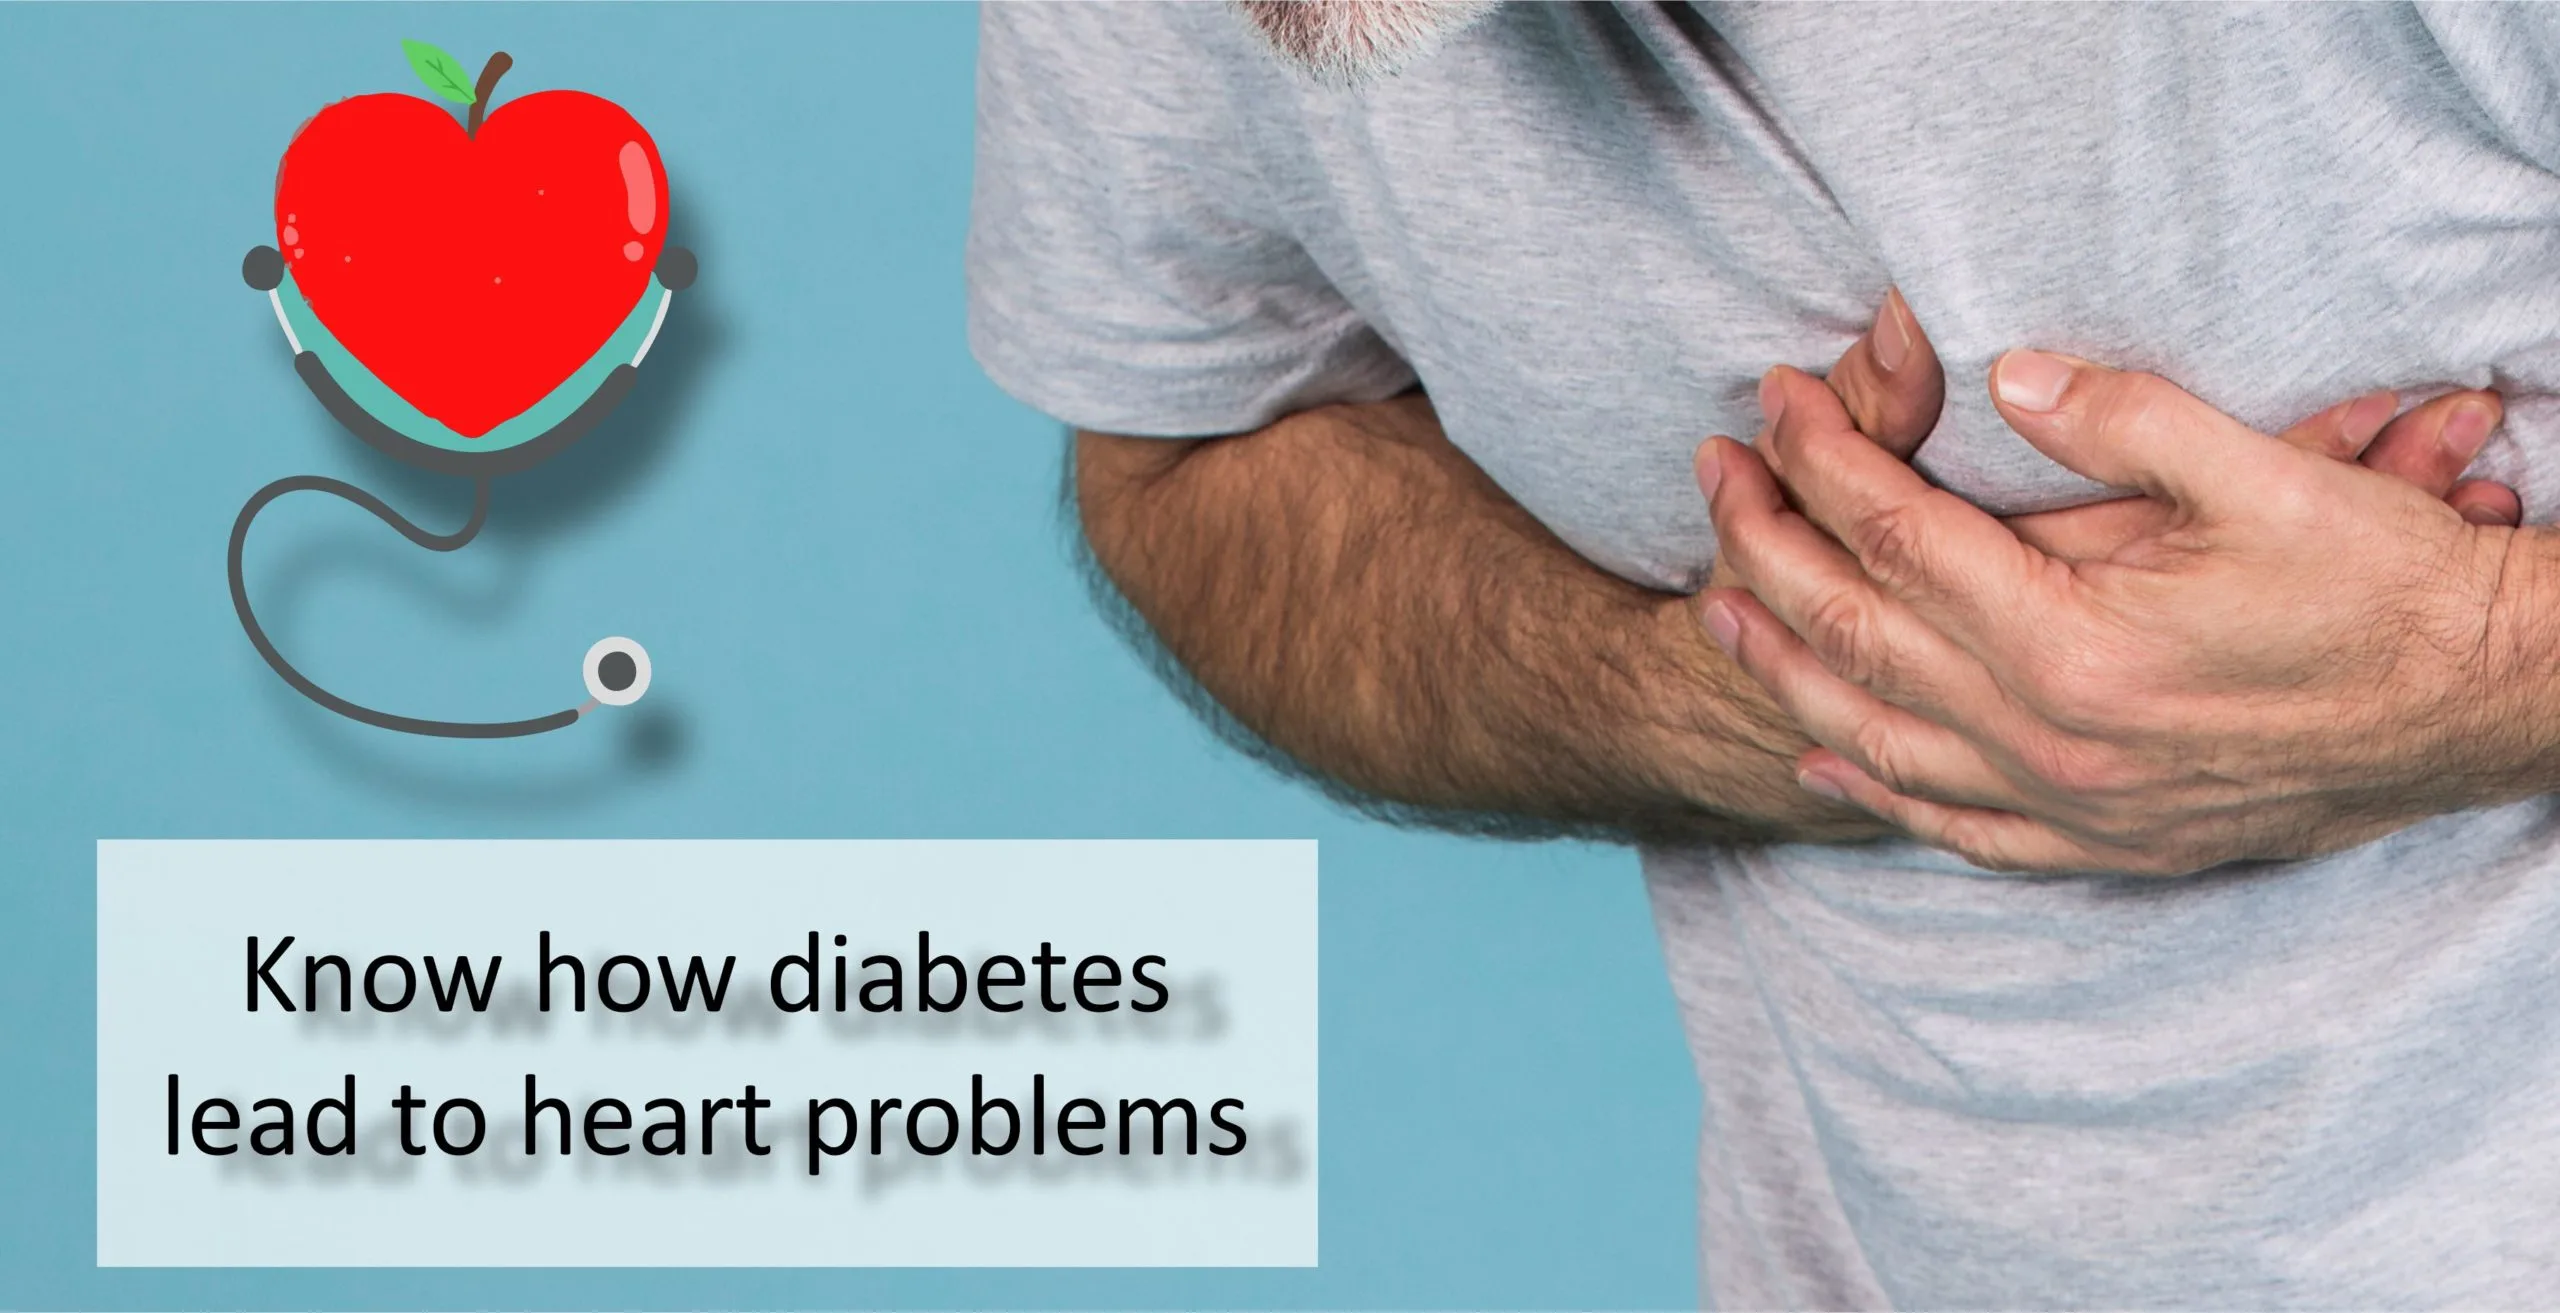 https://www.miracleshealth.com/assets/blog/assets/uploads/blog/Know-how-diabetes-lead-to-heart-problems